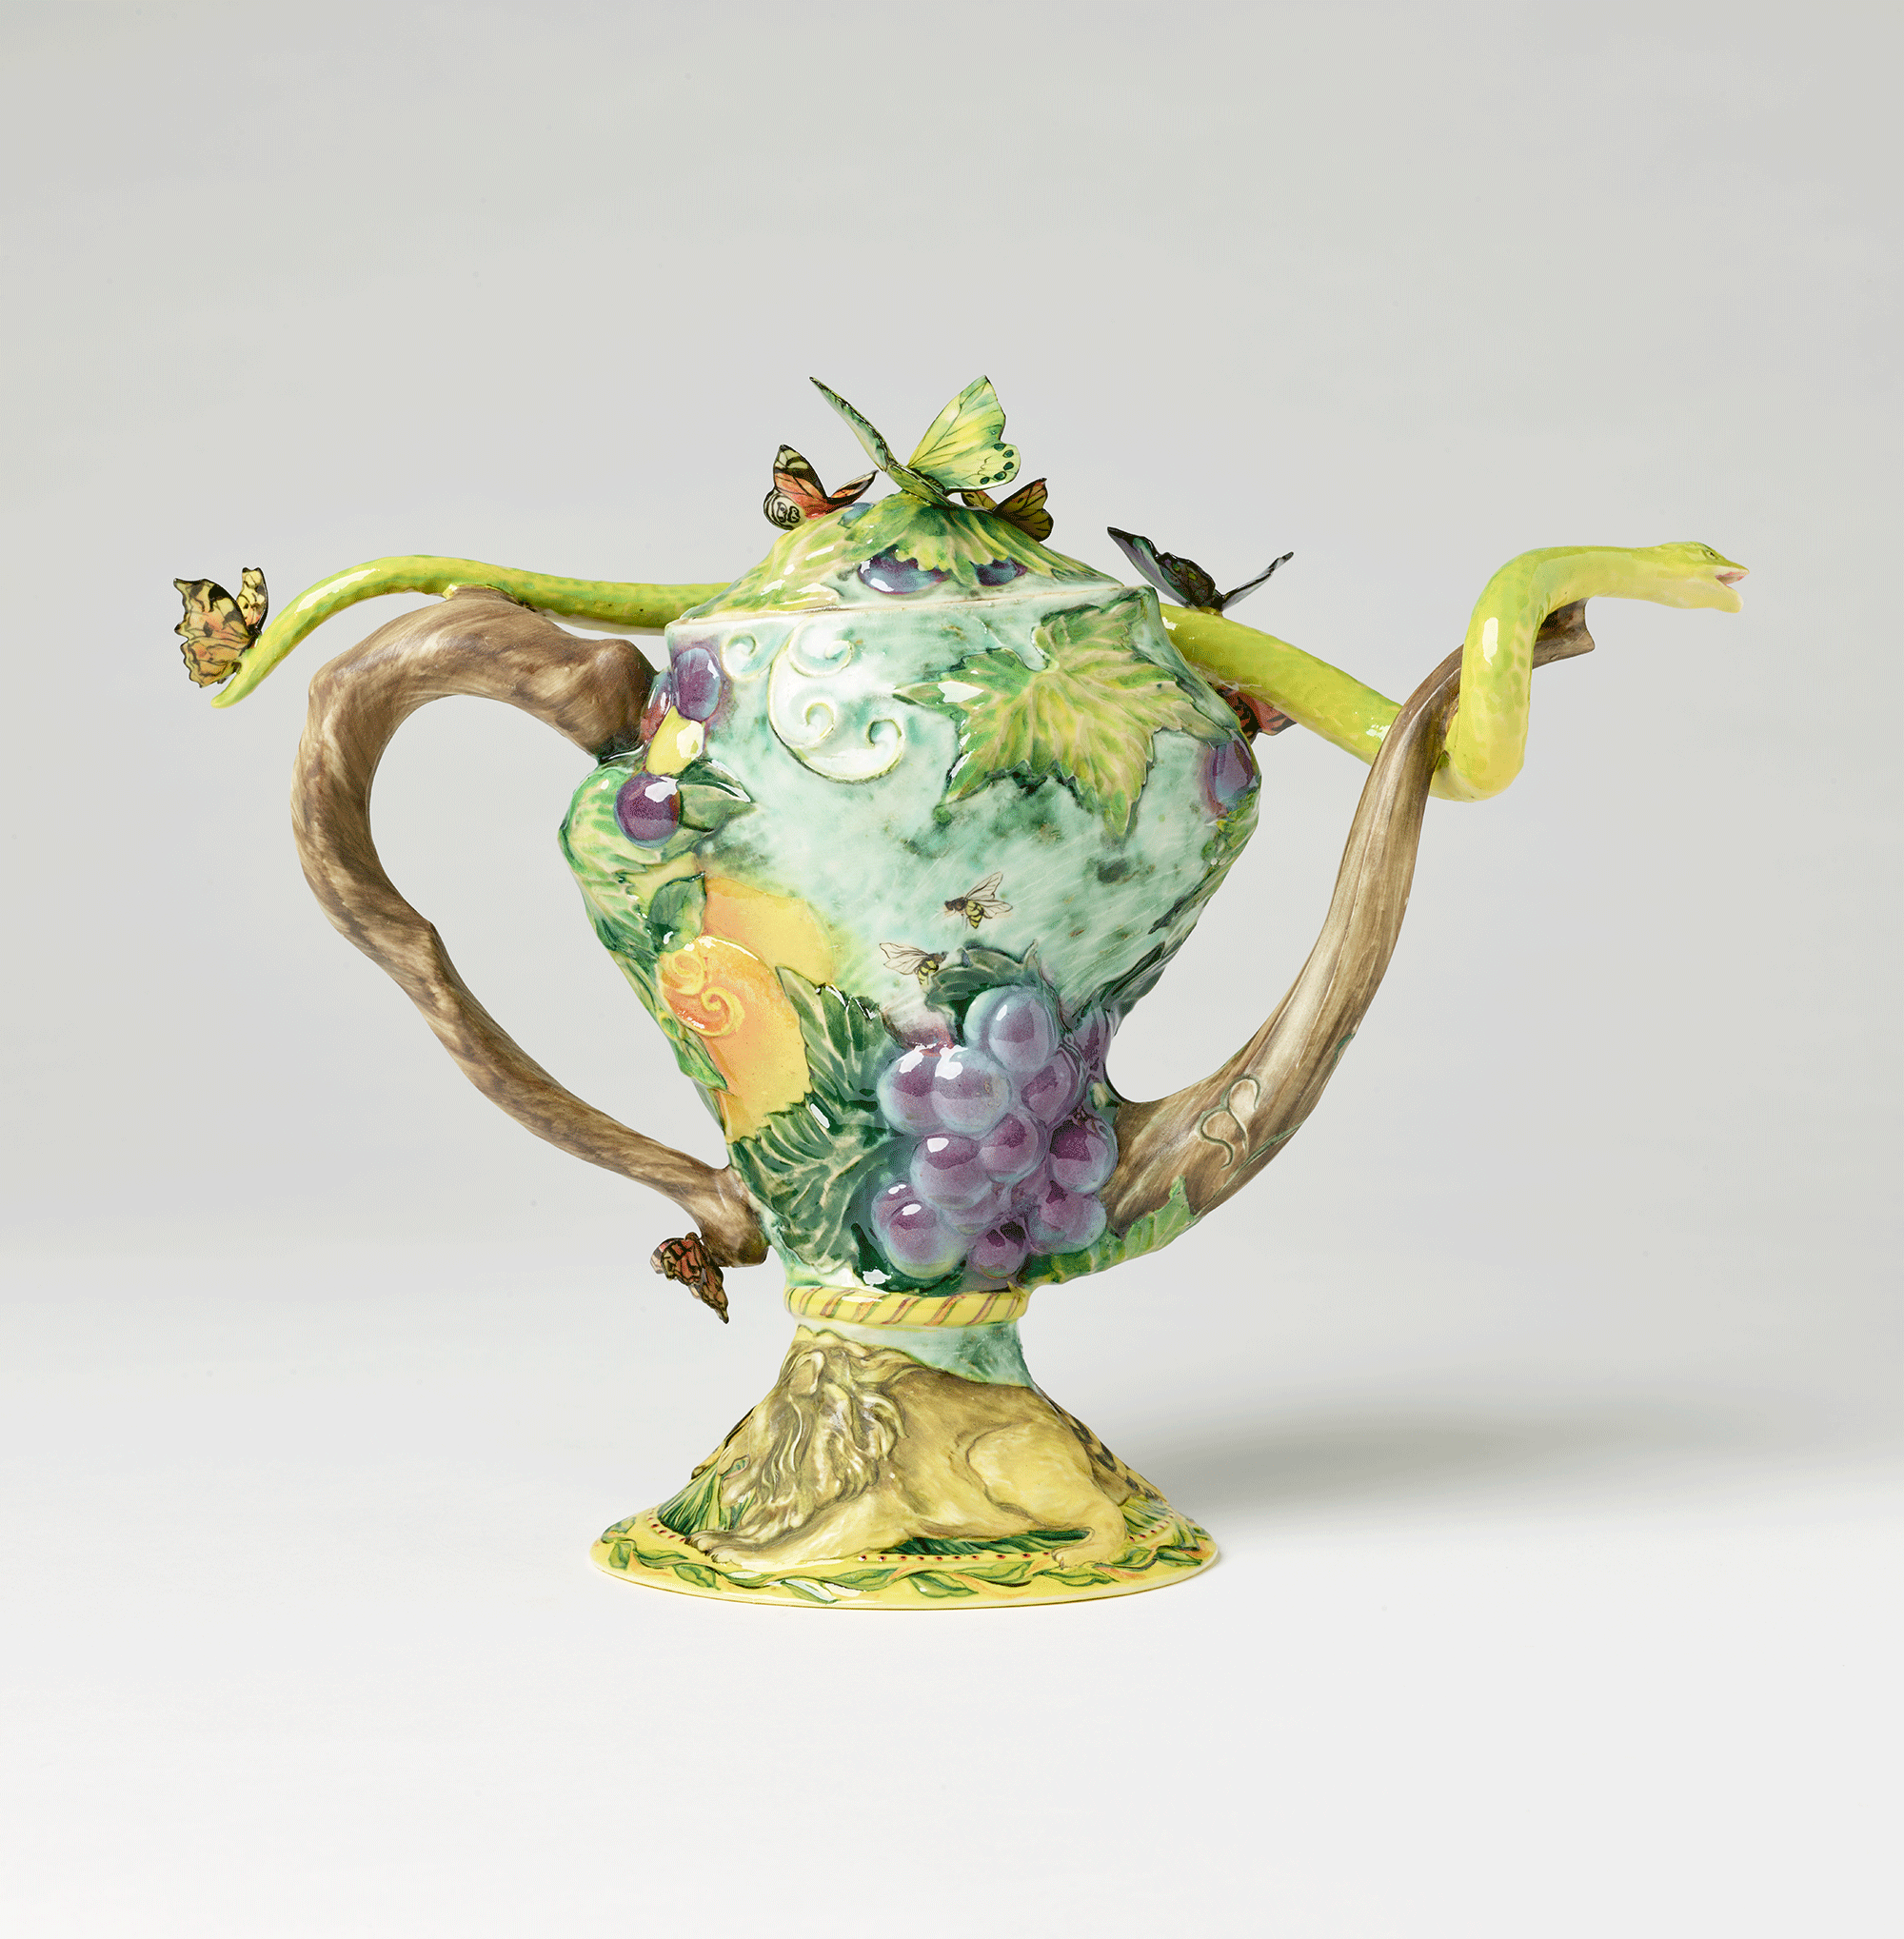 Opposite side of same teapot with leaves and grapes on body. Lion on the base. 3-dimensional butterflies on top of teapot and handle. Green 3-dimensional snake stretches from spout to handle.